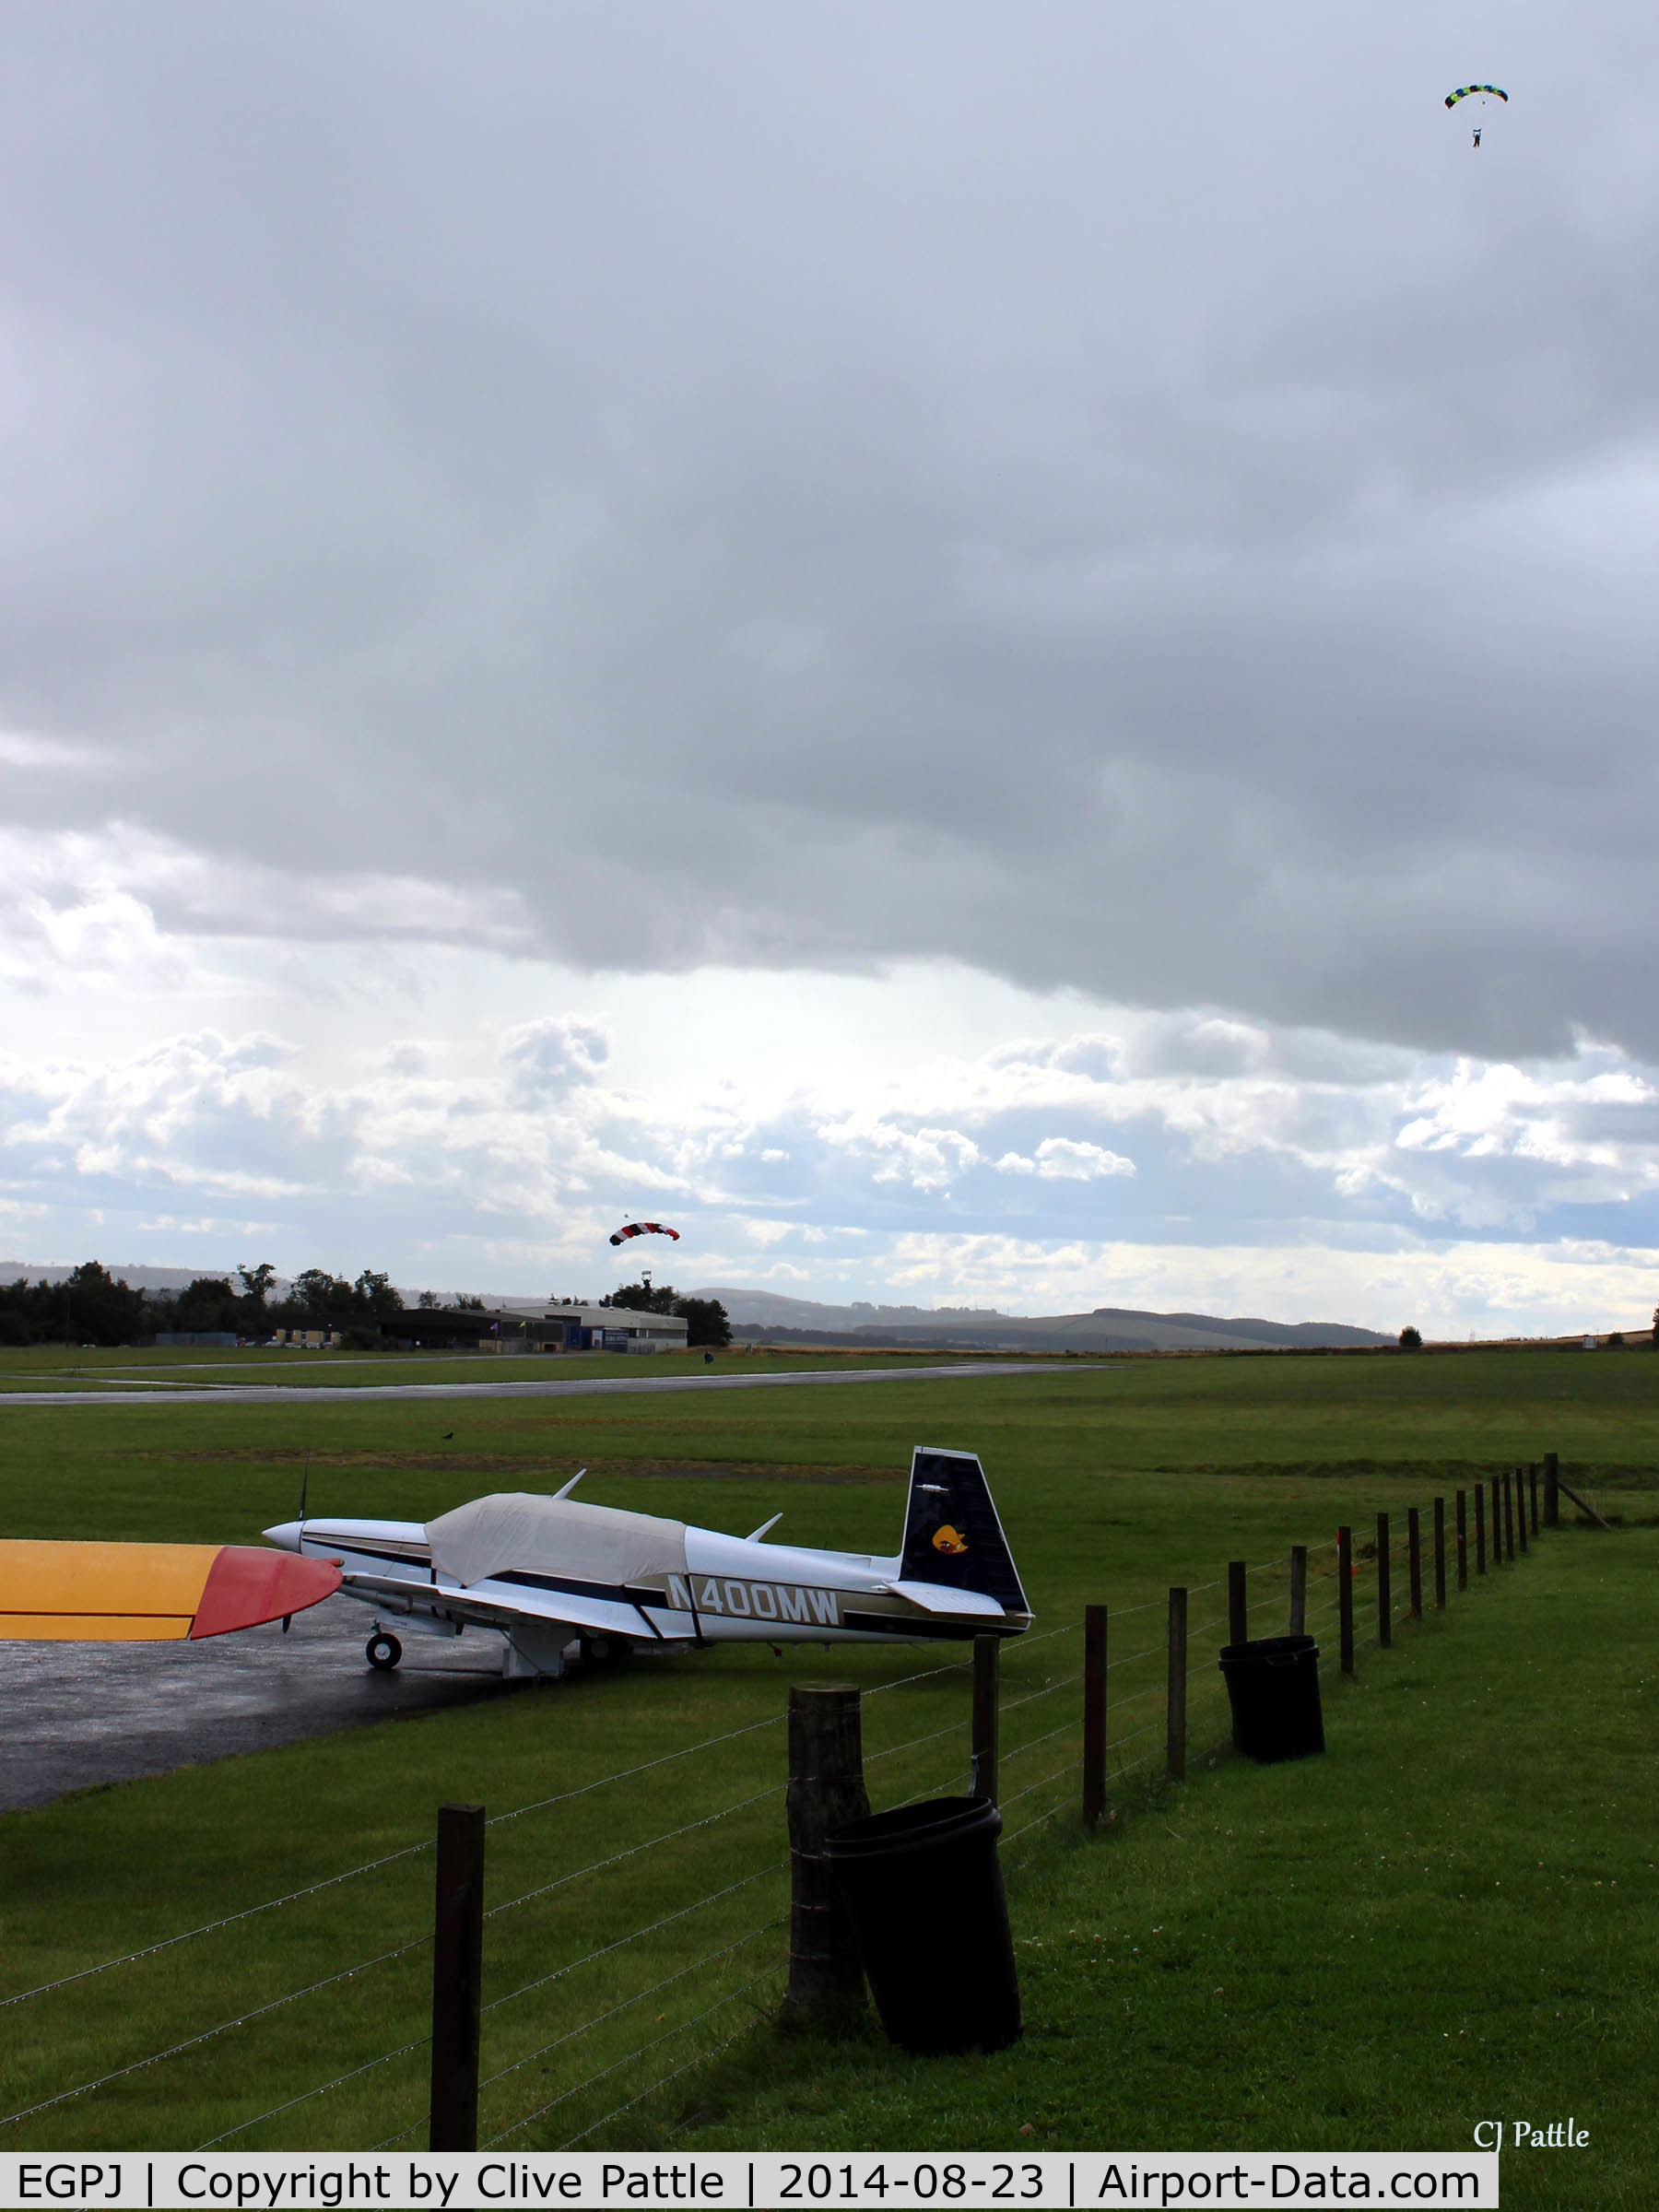 Fife Airport, Glenrothes, Scotland United Kingdom (EGPJ) - View looking west at Glenrothes EGPJ with parachutists landing